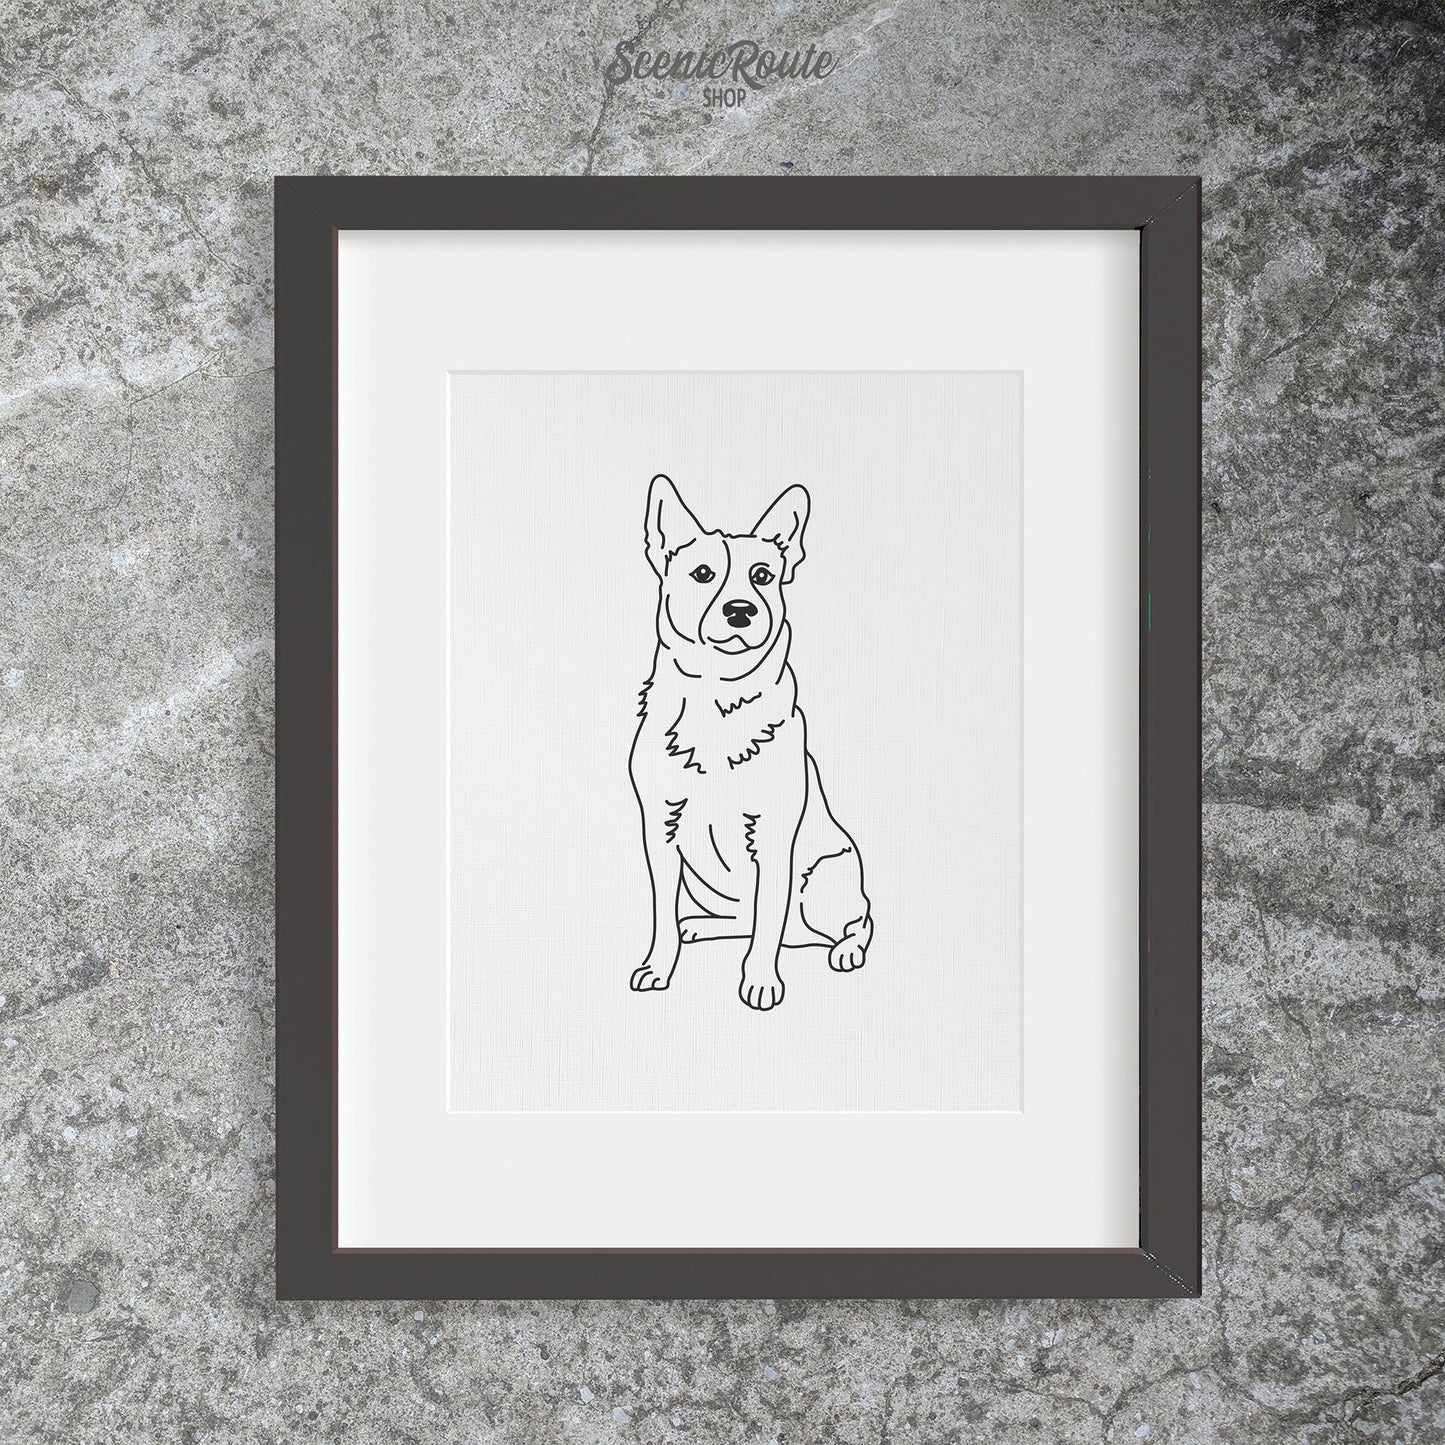 A drawing of an Australian Cattle Dog in a black frame on a concrete wall.